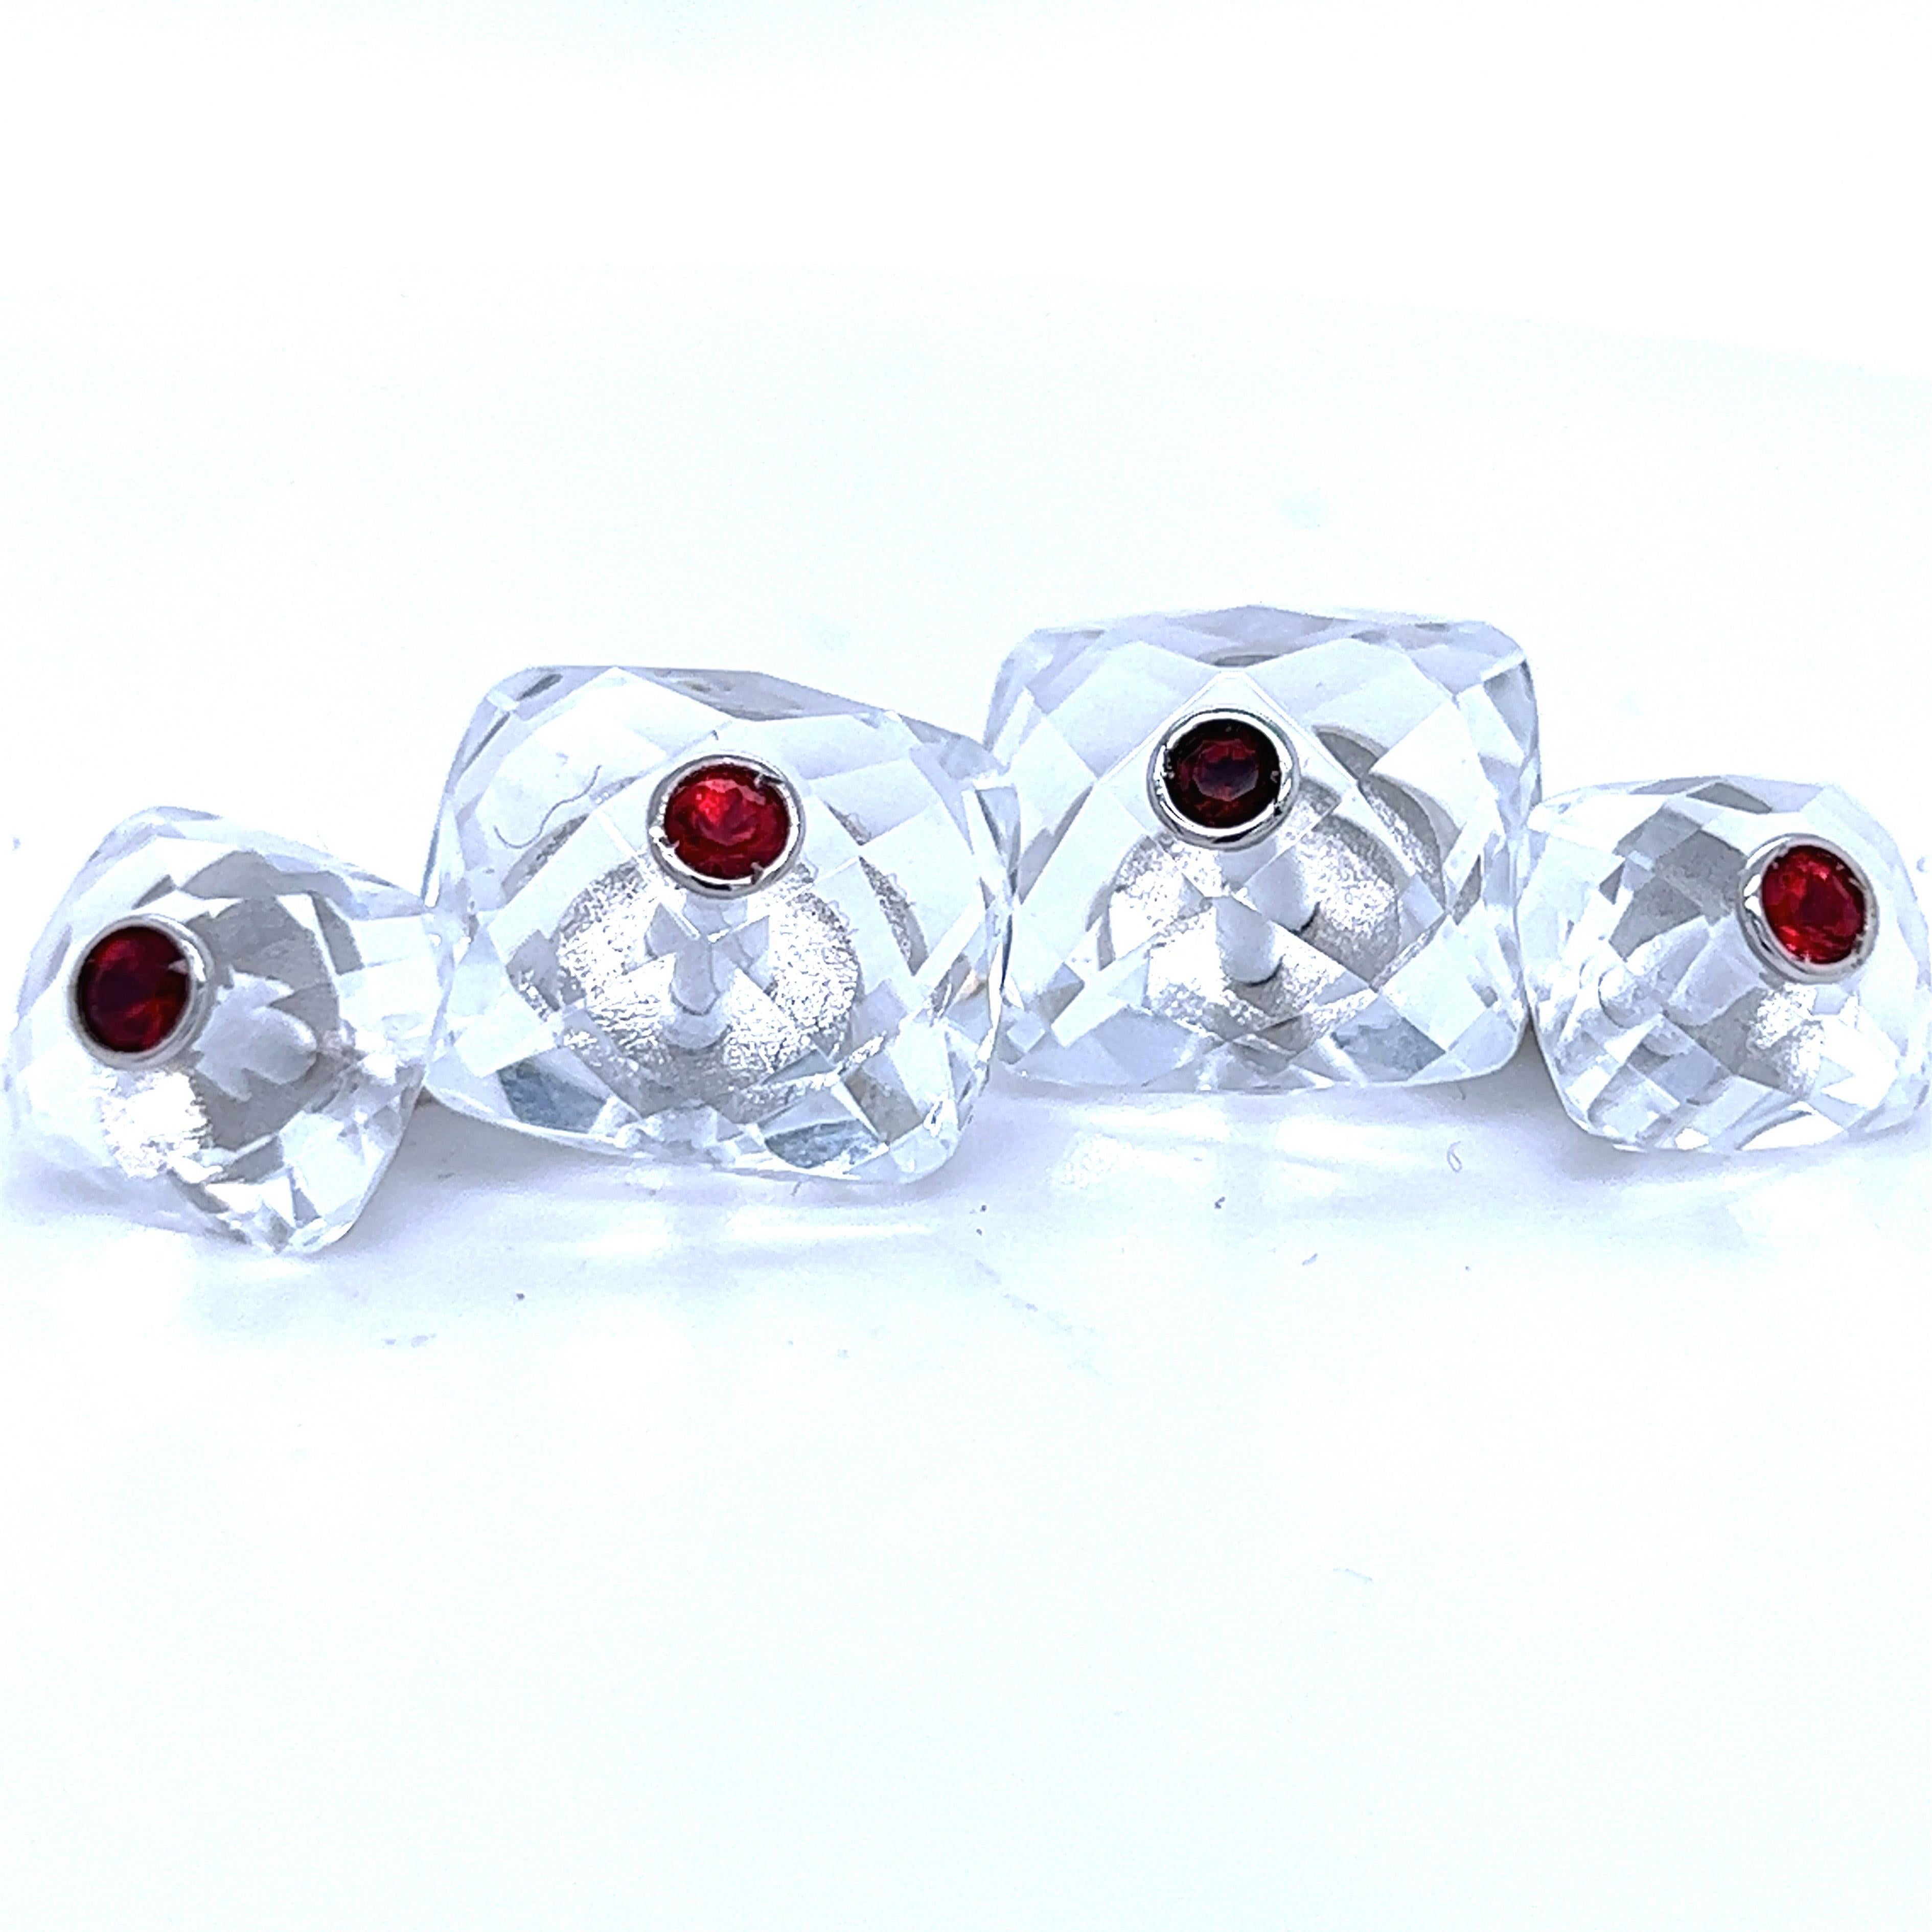 Unique, Chic yet Timeless 0.59 Carat Round Ruby Brilliant Cut in an 30 Carat Hand Inlaid Double Faceted  Transparent Rock CrystalQuartz White Gold Setting Cufflinks.
In our smart fitted Suede Tobacco Leather Case and Pouch.
